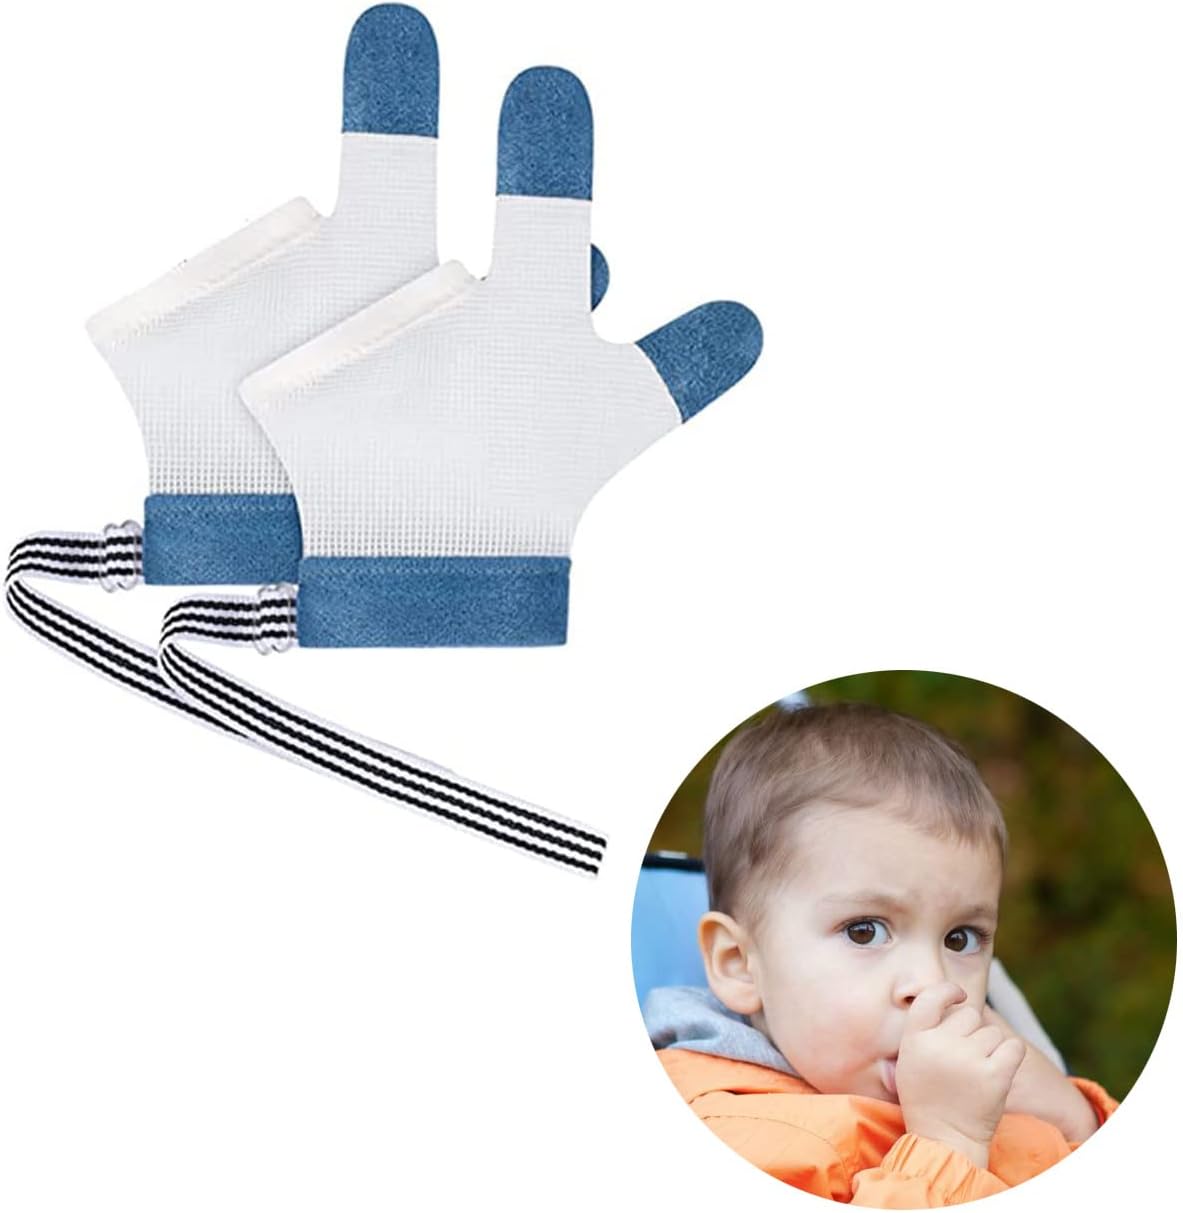 ULHYC Anti-Baby Thumb-Sucking, Anti-Finger-Eating, Anti-Face-Scratching, Finger-Sucking Treatment Gloves for Baby Kids Infant - Blue